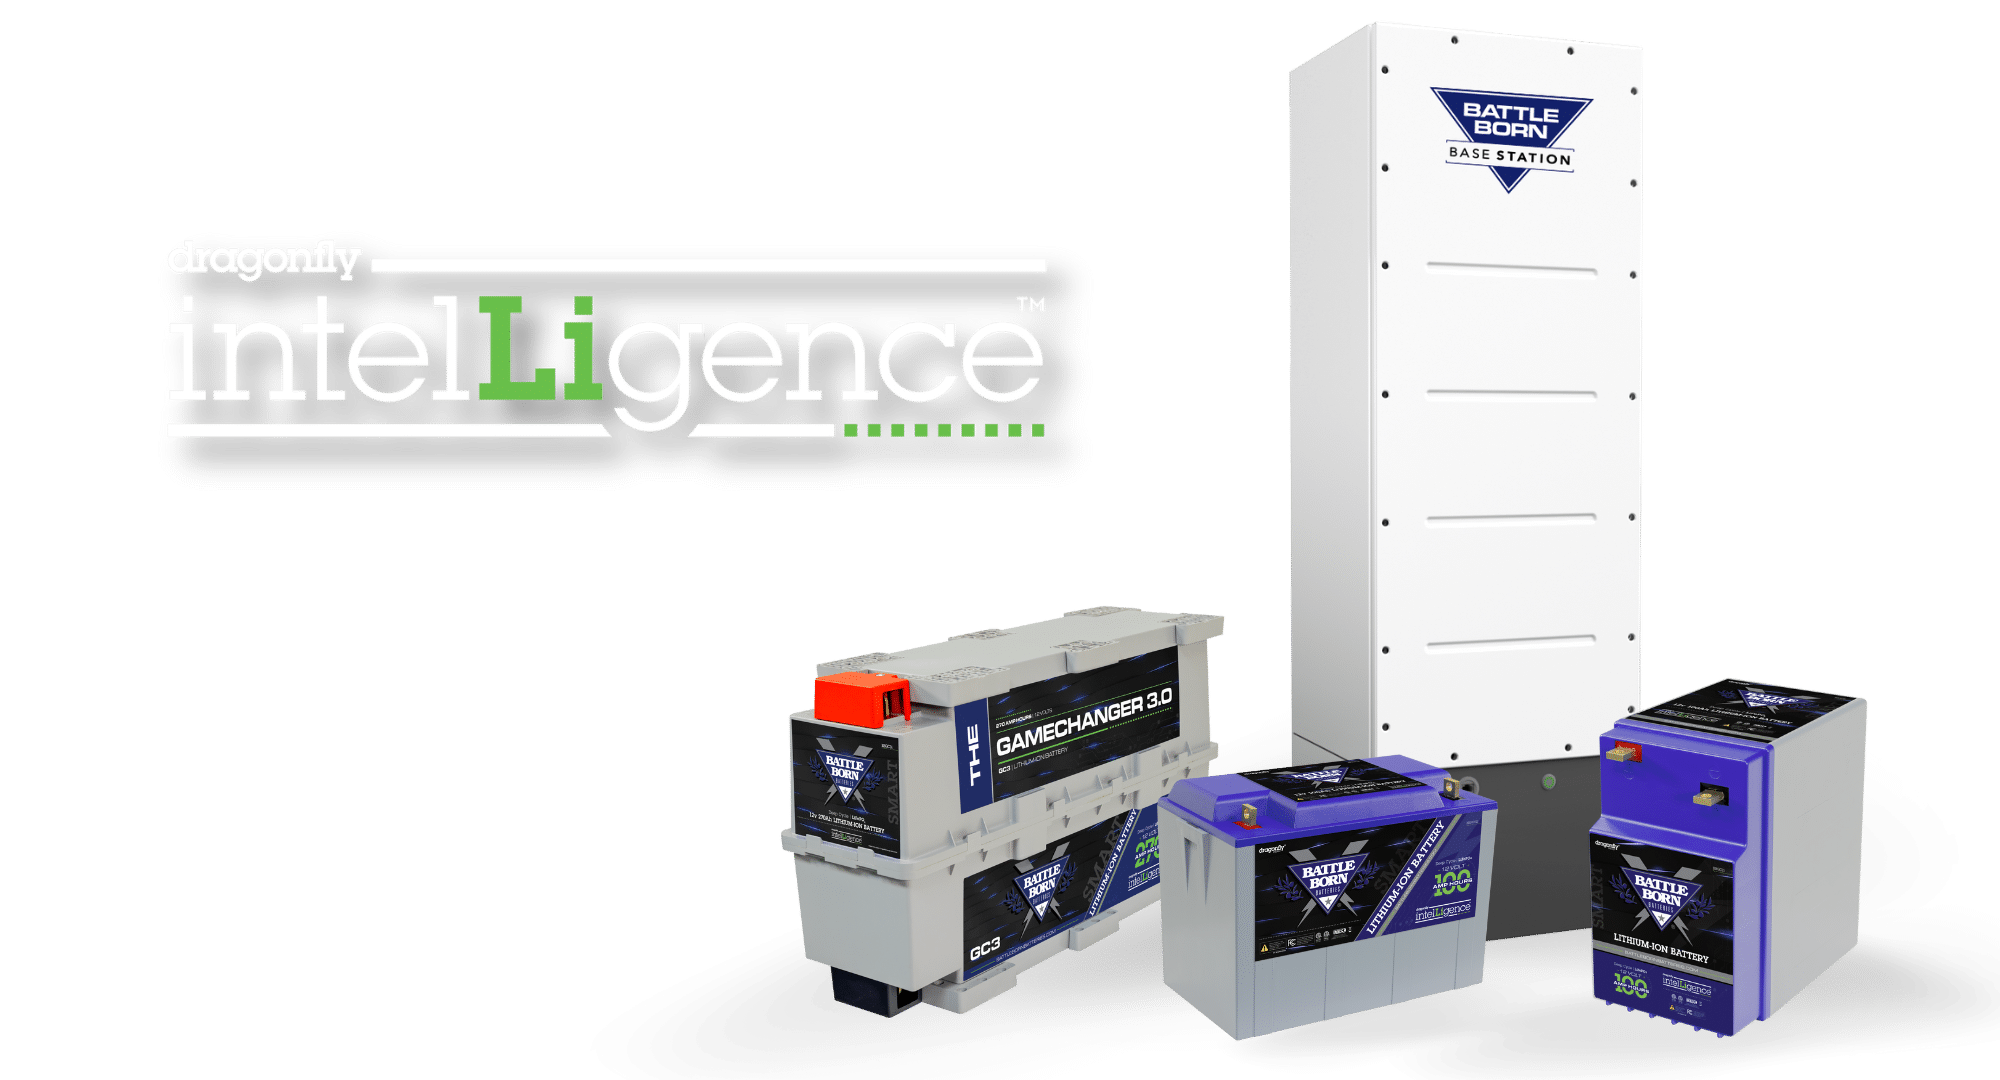 Dragonfly IntelLigence technology smart lithium battery product line